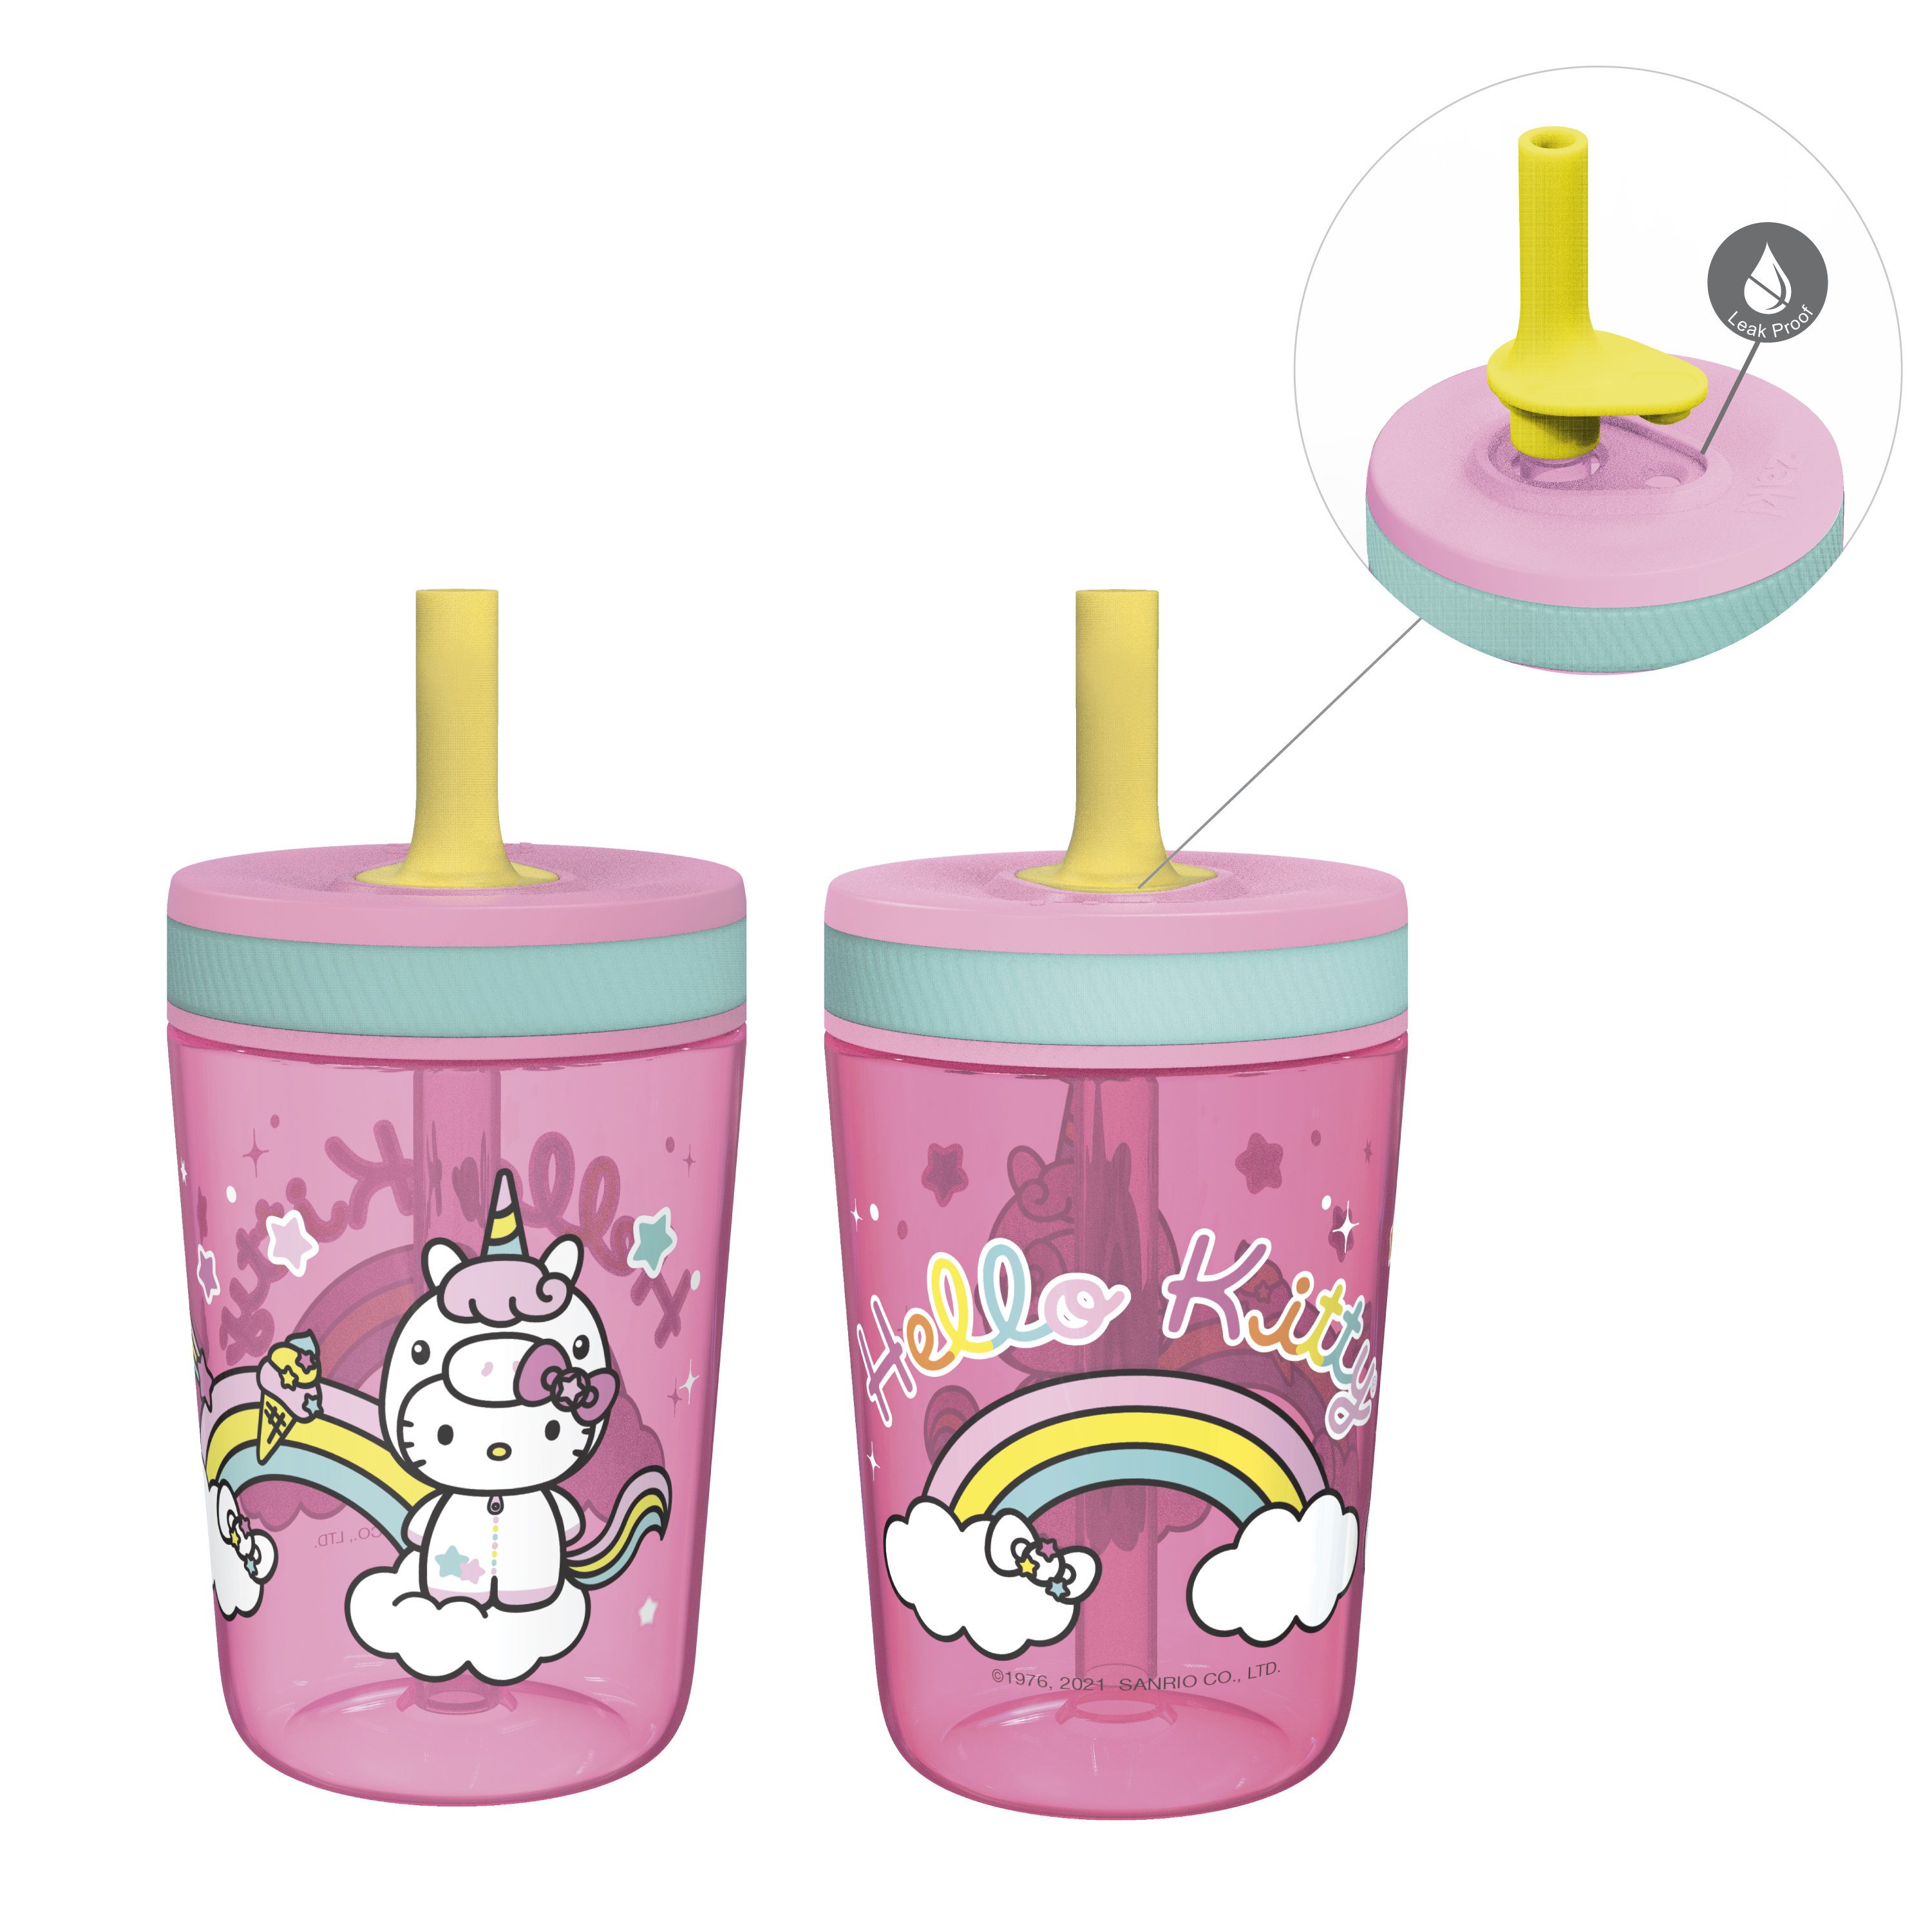 Sanrio 15  ounce Plastic Tumbler with Lid and Straw, Hello Kitty, 2-piece set slideshow image 1